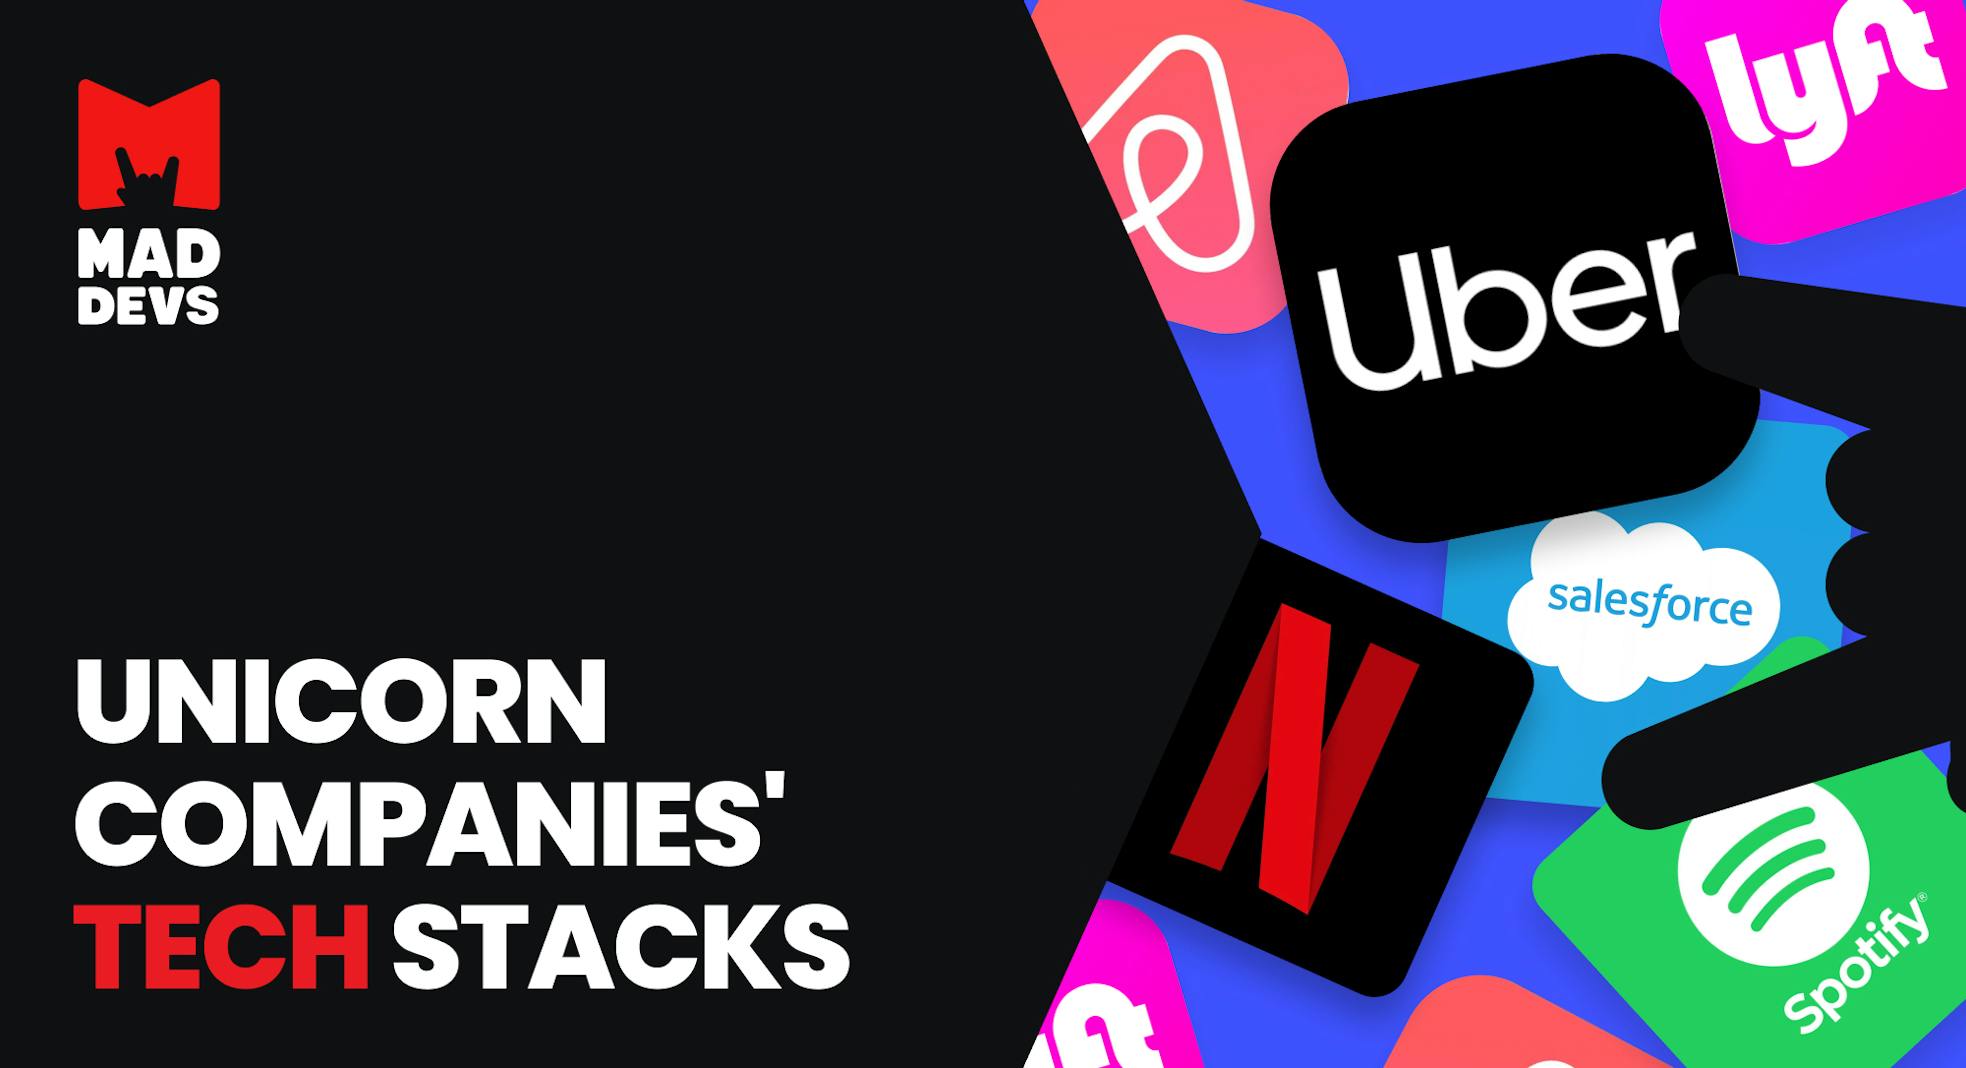 Tech Stack of Prominent Companies: What Are Industry Giants Using to Power Their Applications?